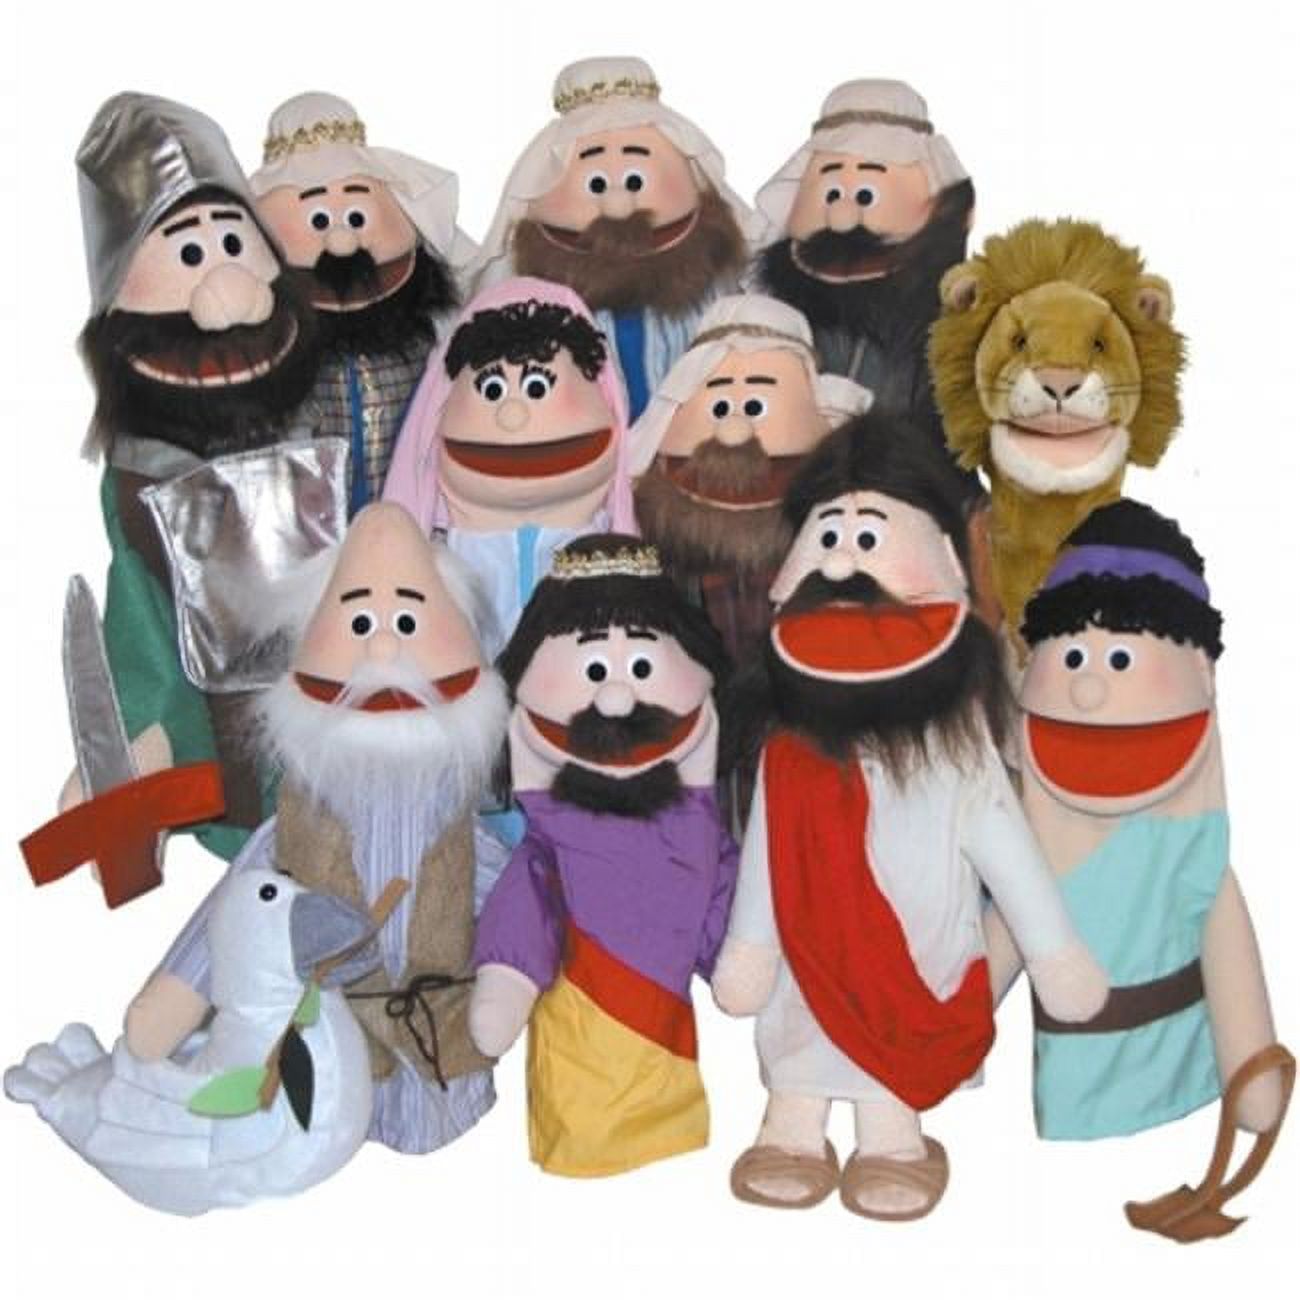 Get Ready 385 Bible Rich Man puppet- 18 inch - image 1 of 1